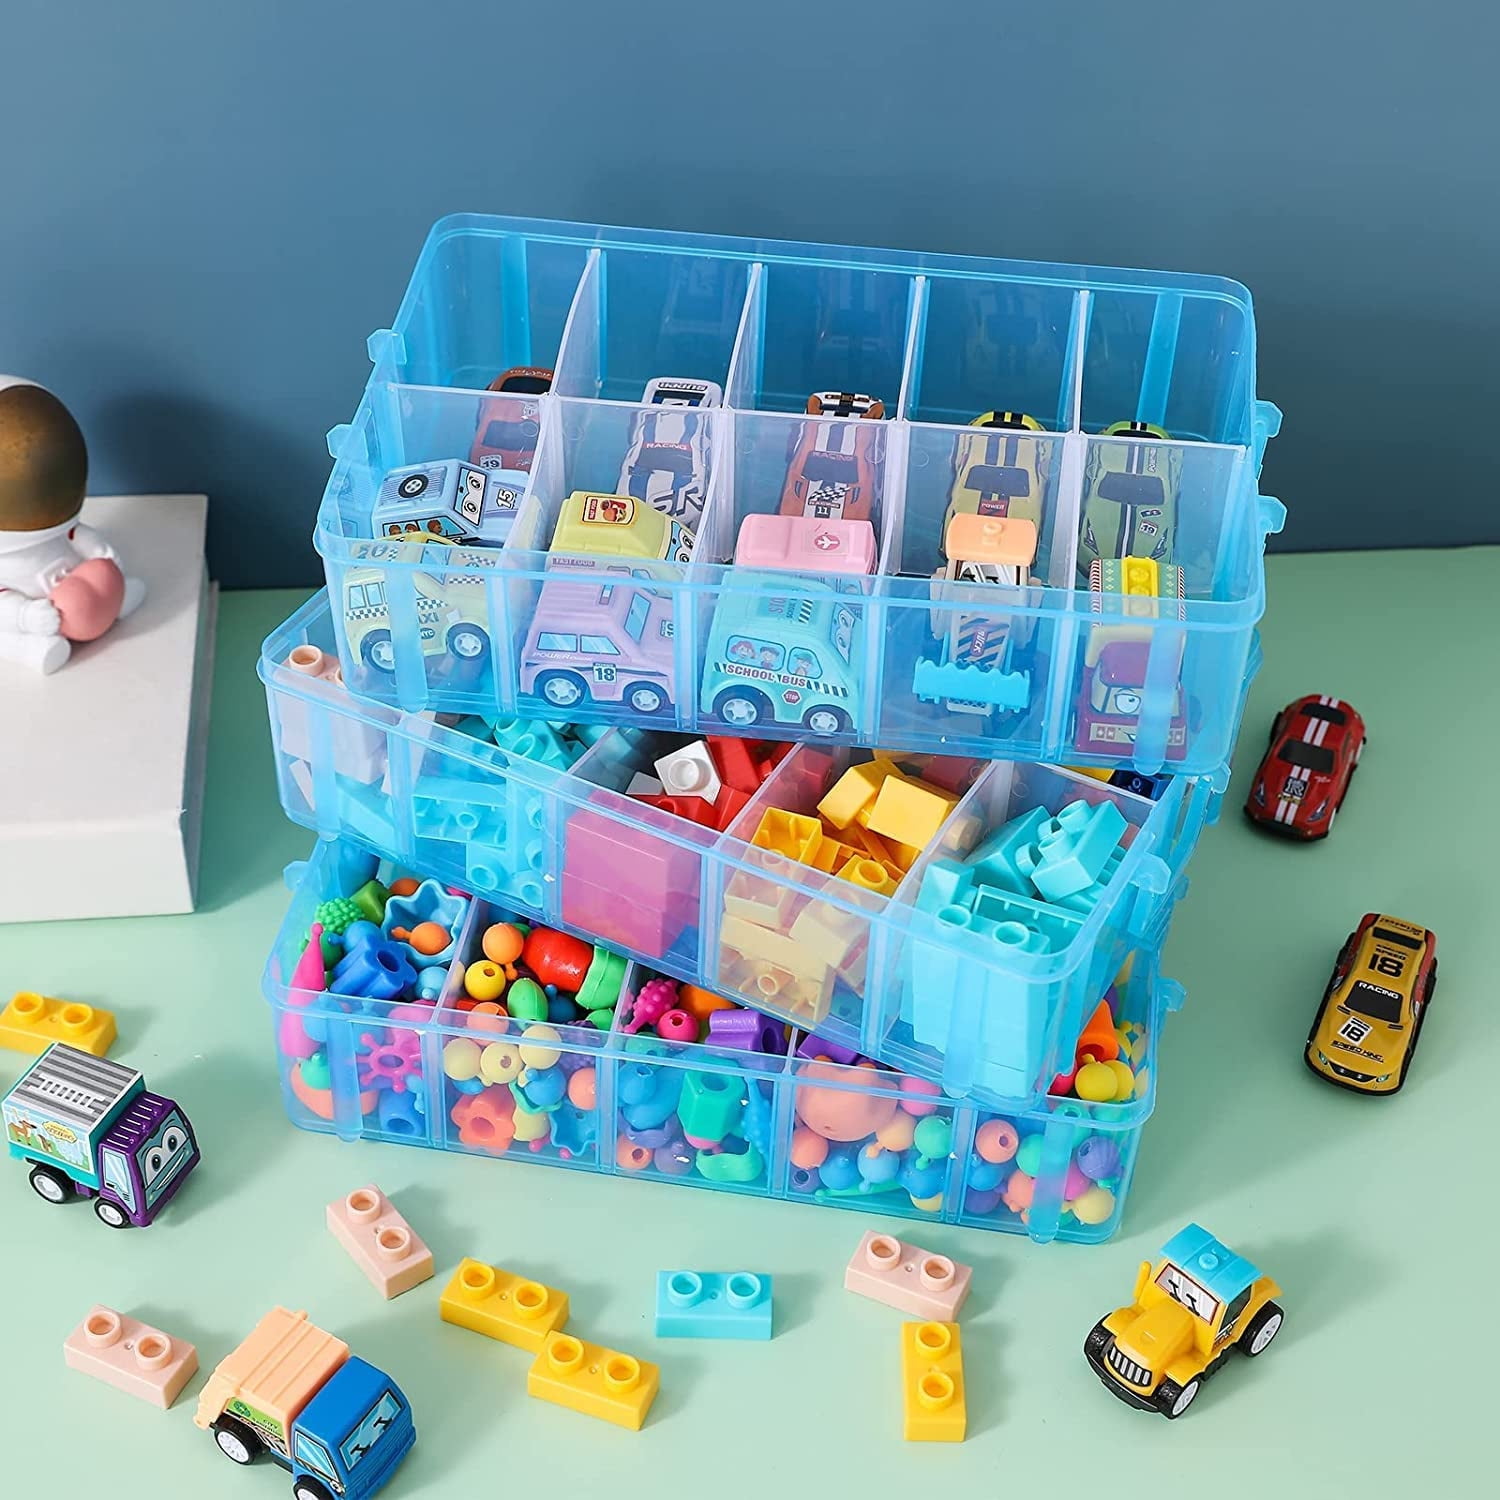 The Best Storage Containers for Art Supplies and Toy Sets